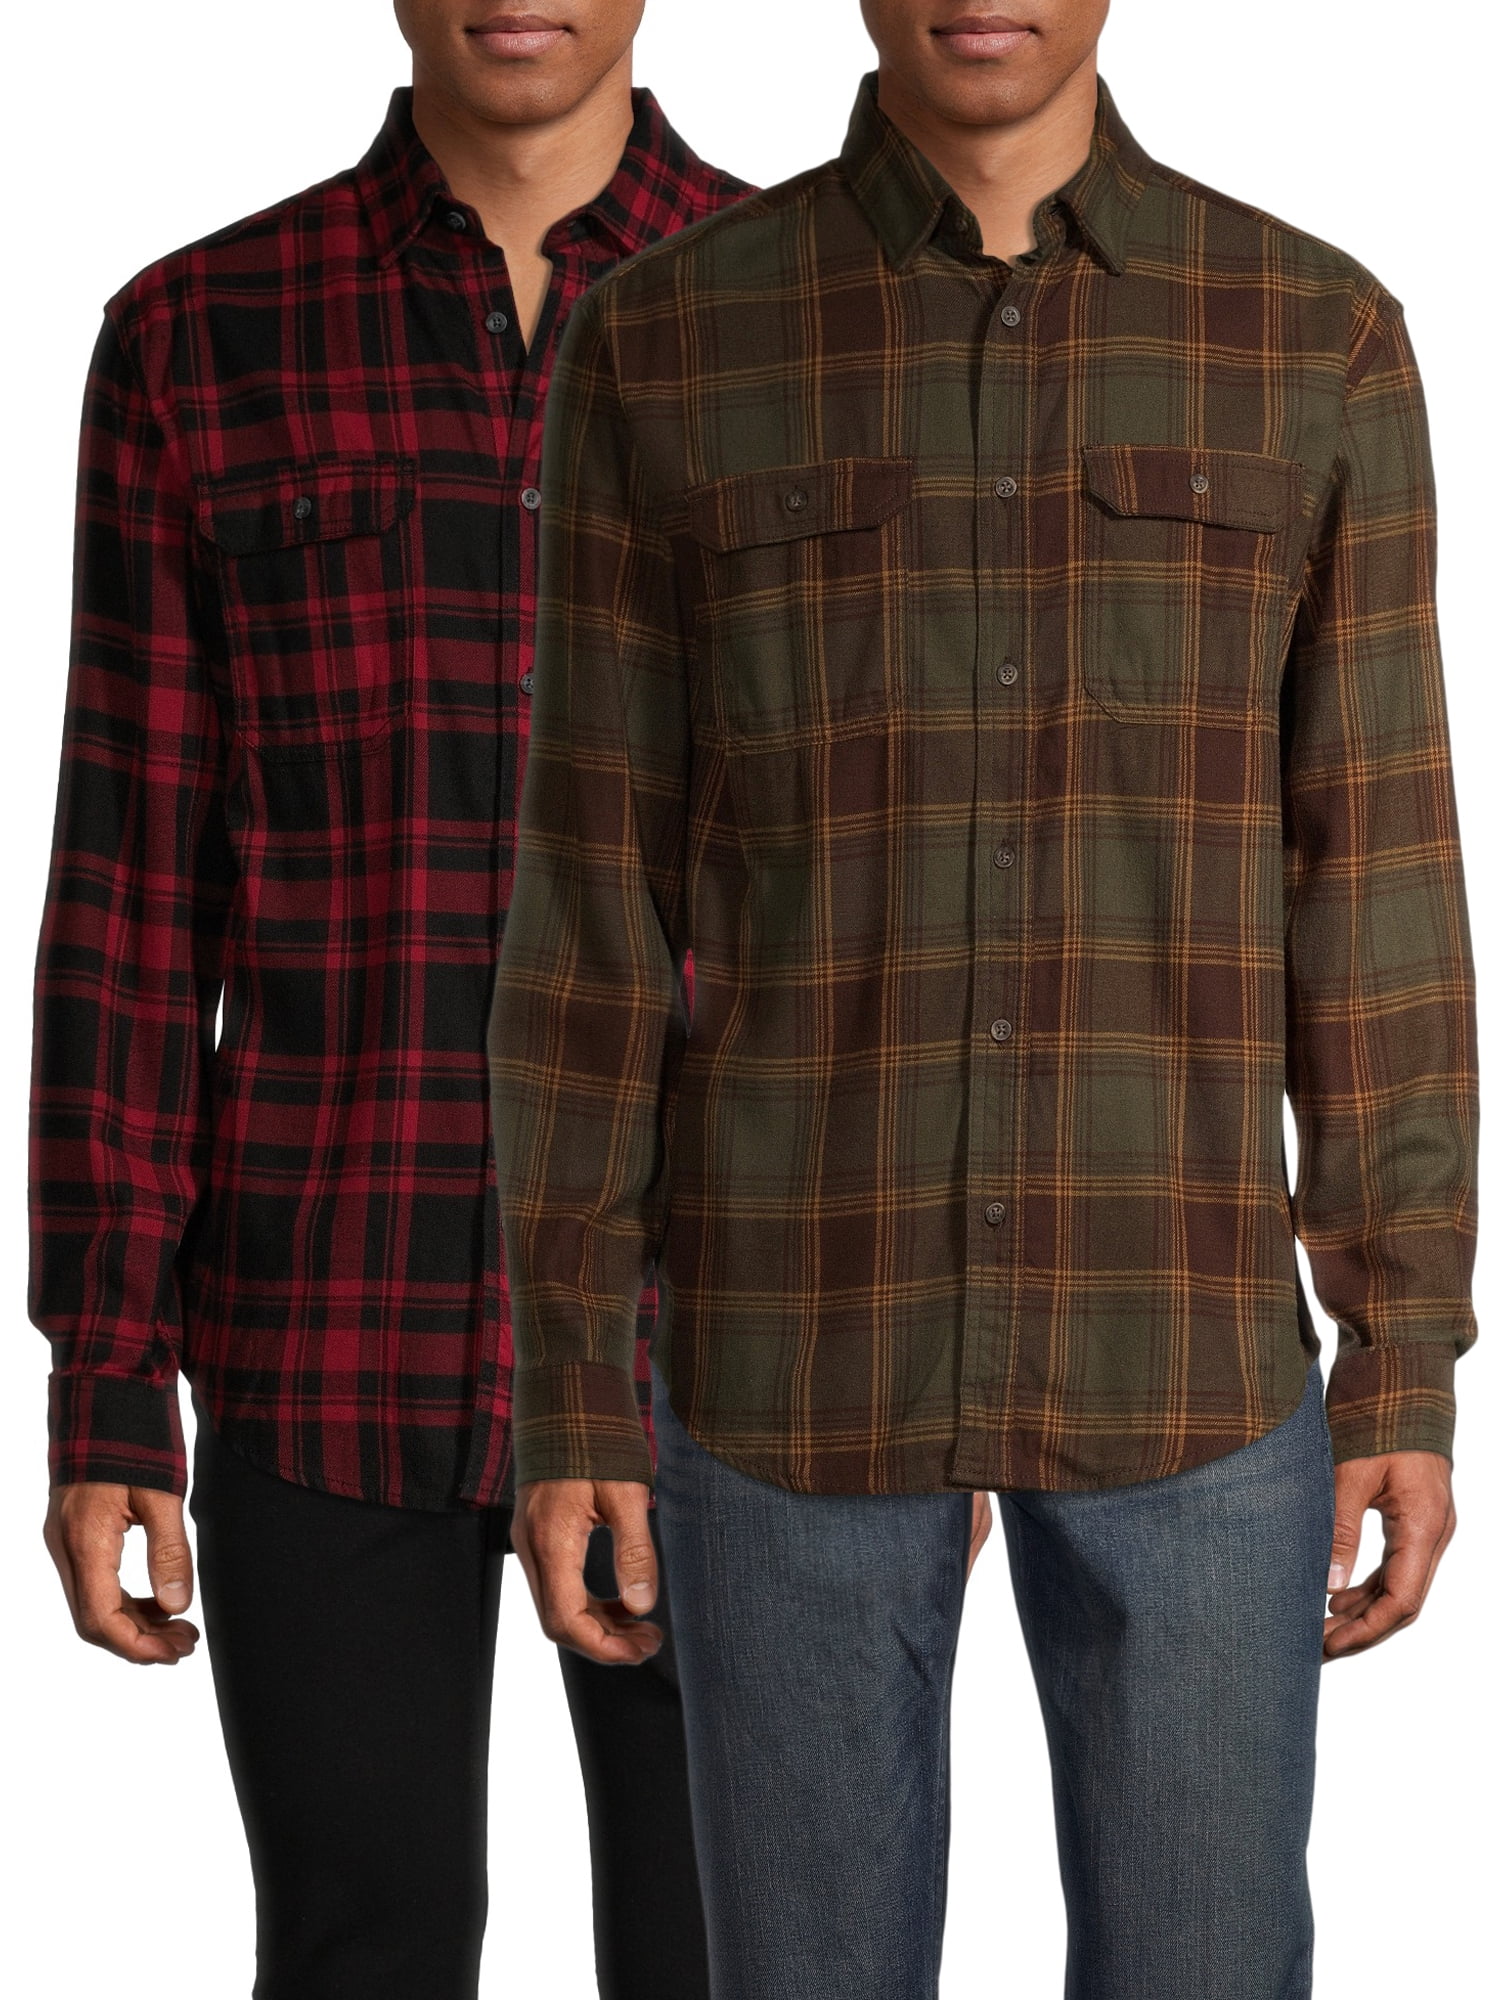 George Men's and Big Men's Flannel Shirts, 2-Pack, Up to 5XL - Walmart.com